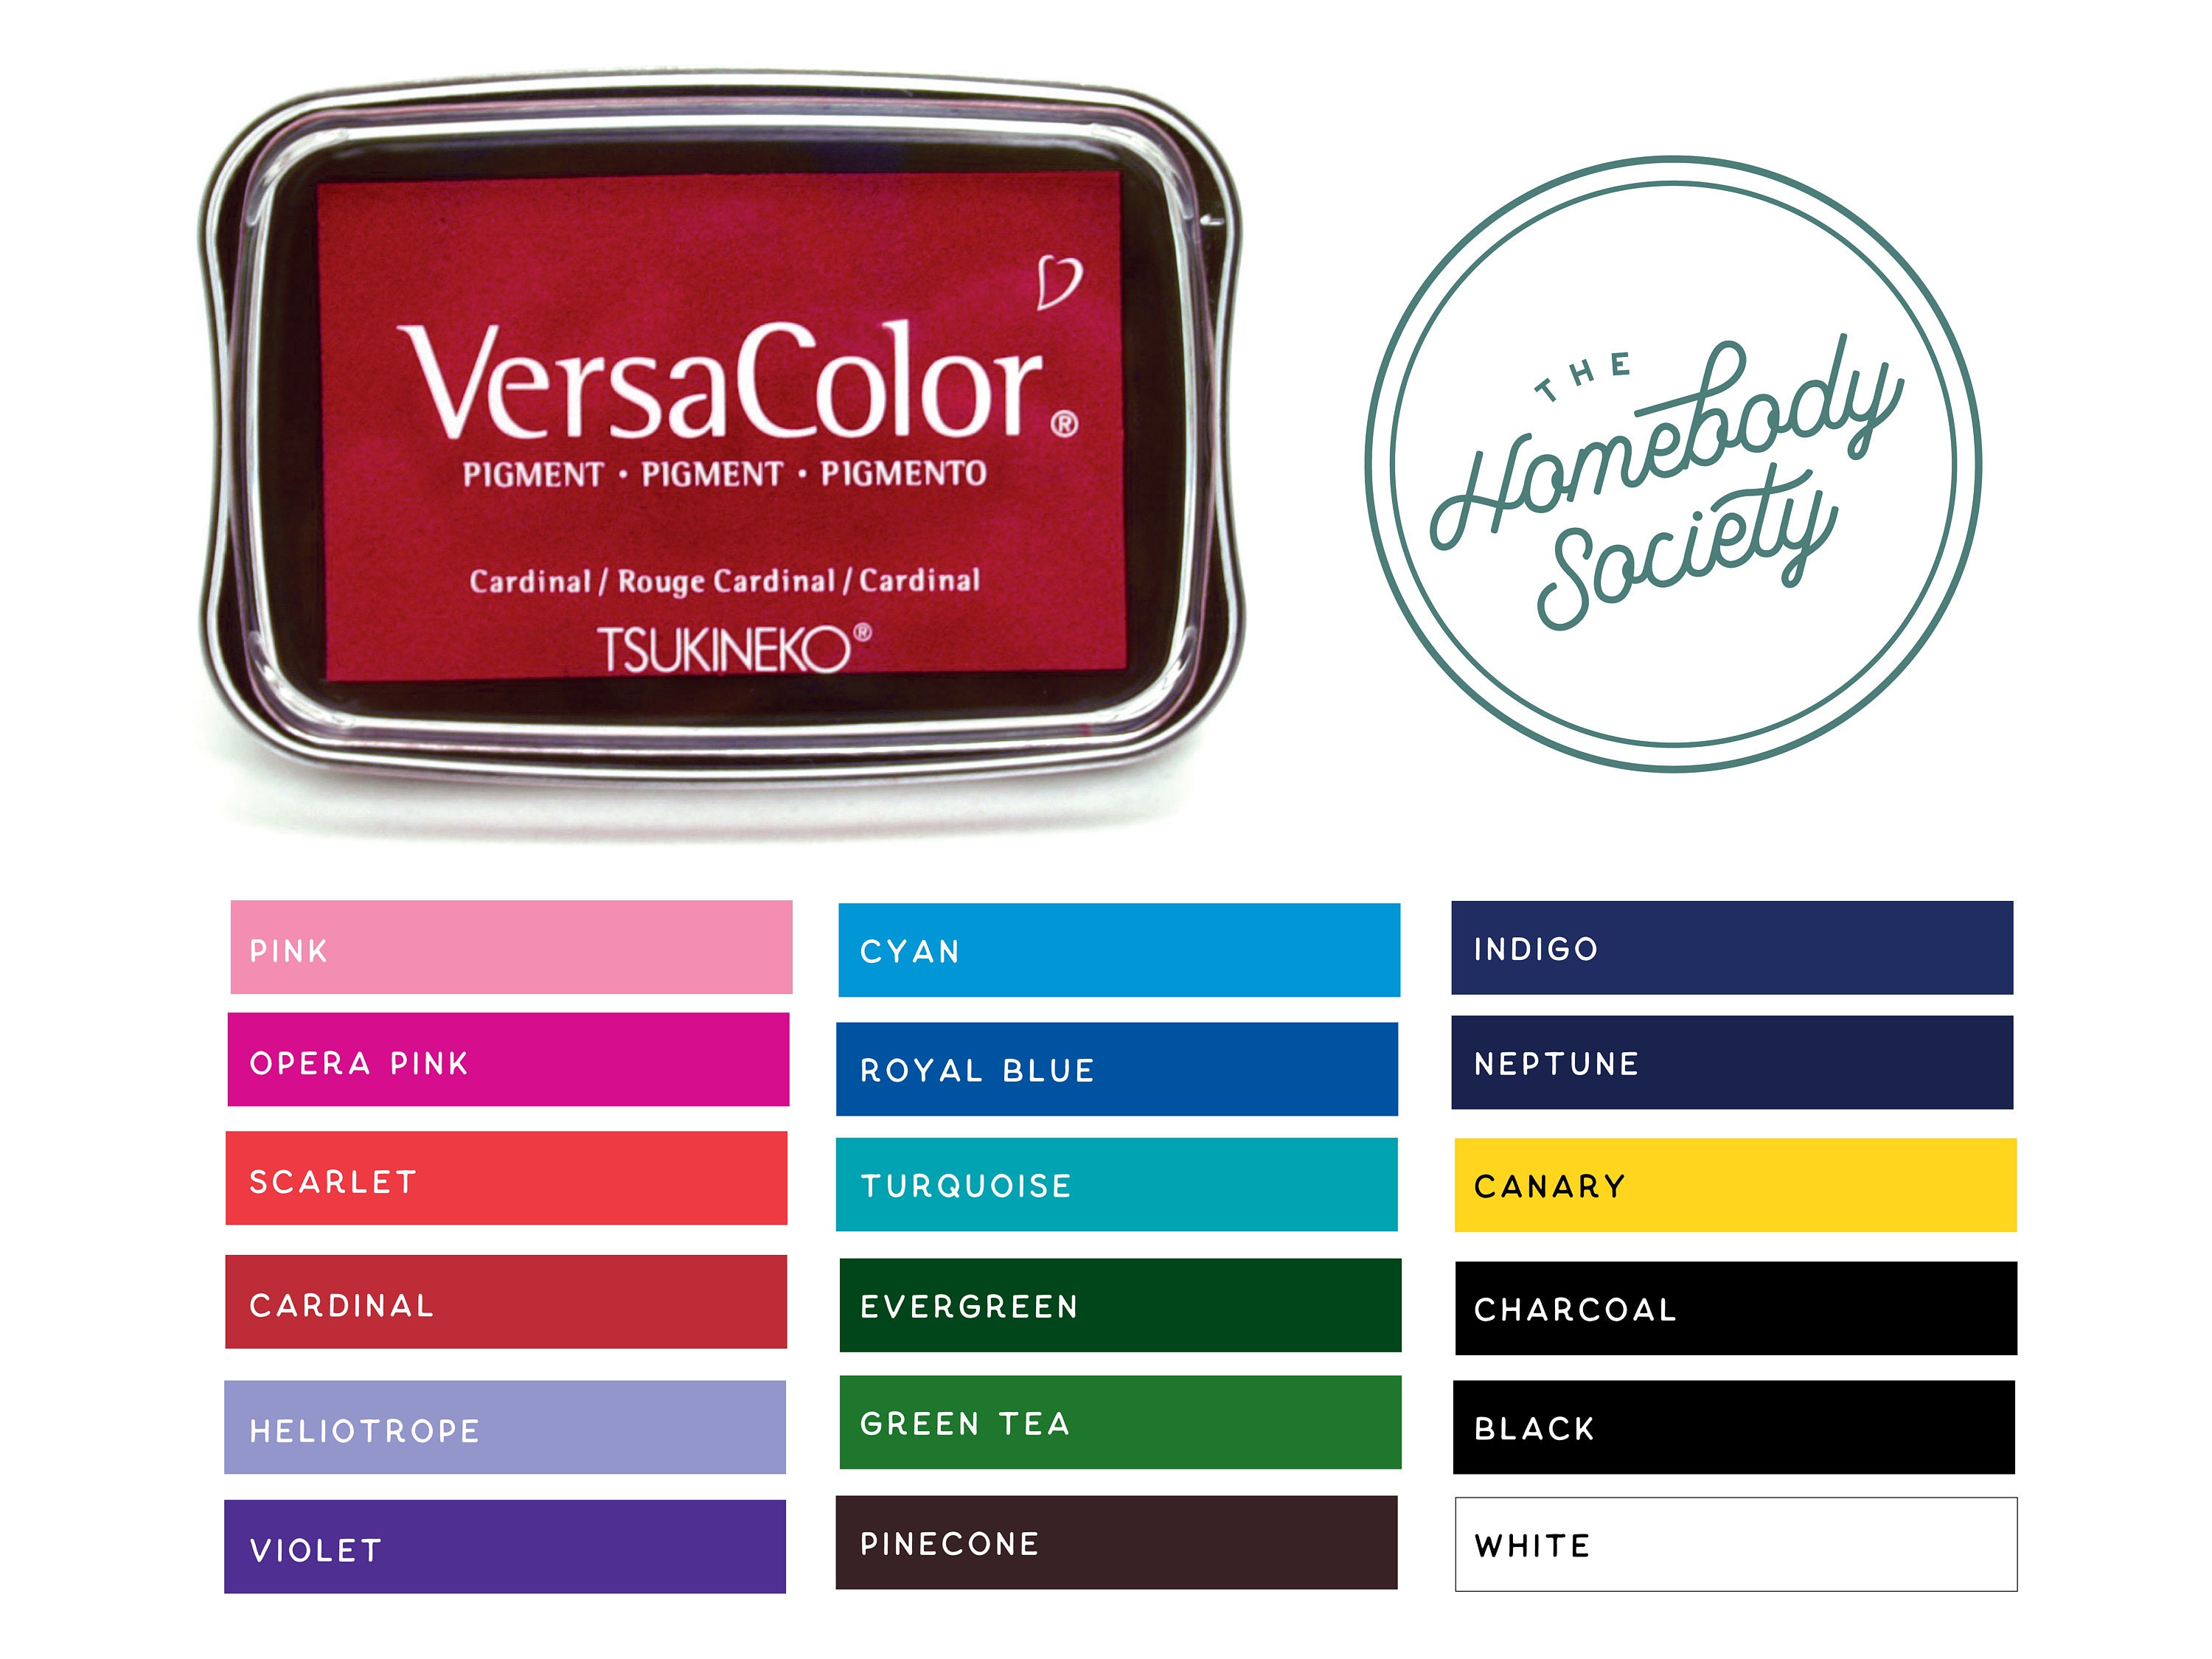 Versacolor Ink Pads for Stamp Pigment Ink Pads for Stamps Choice of 16  Colors 